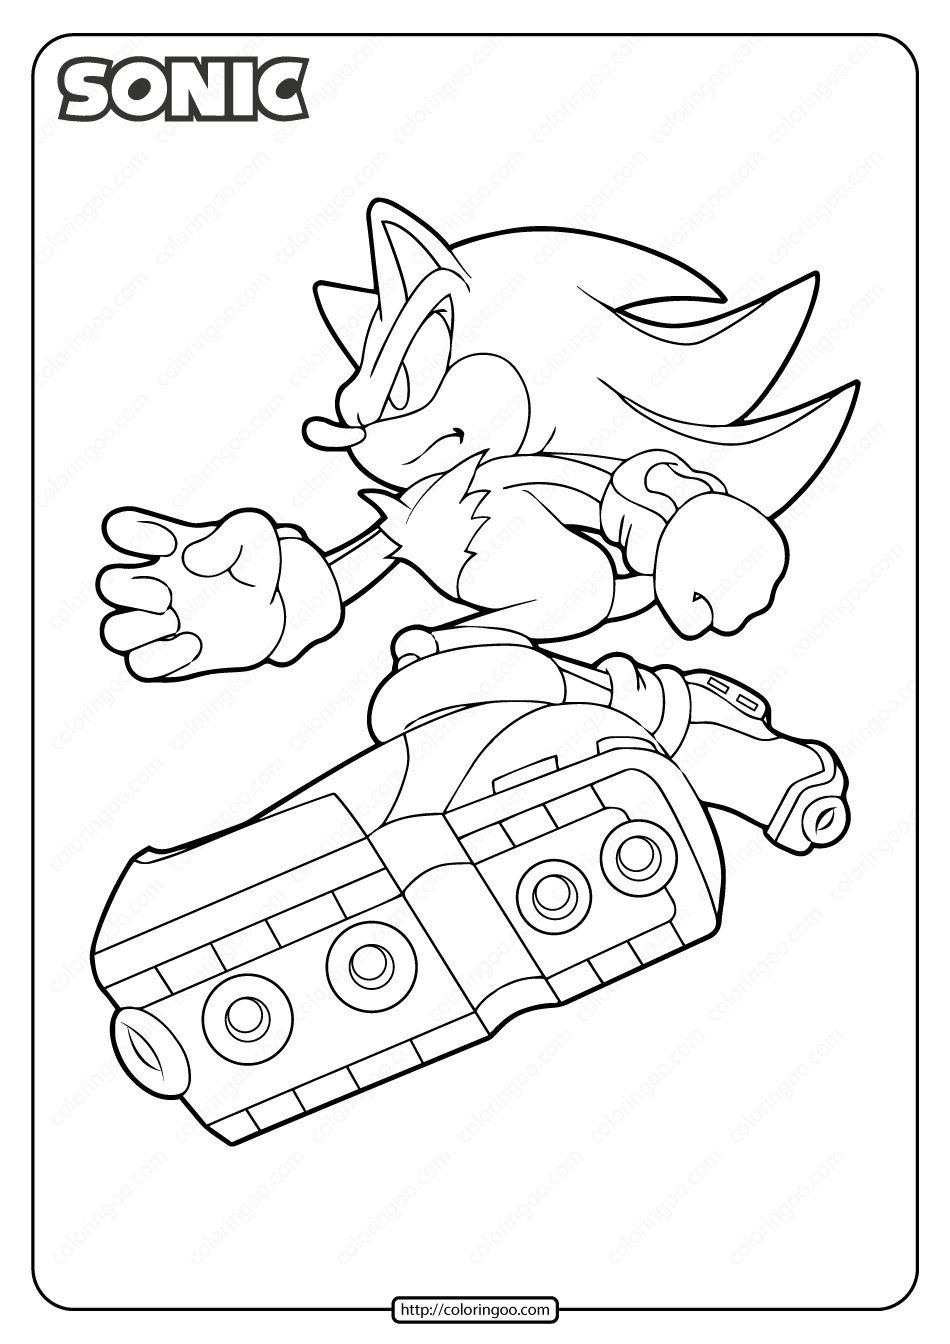 printable sonic the hedgehog pdf coloring pages